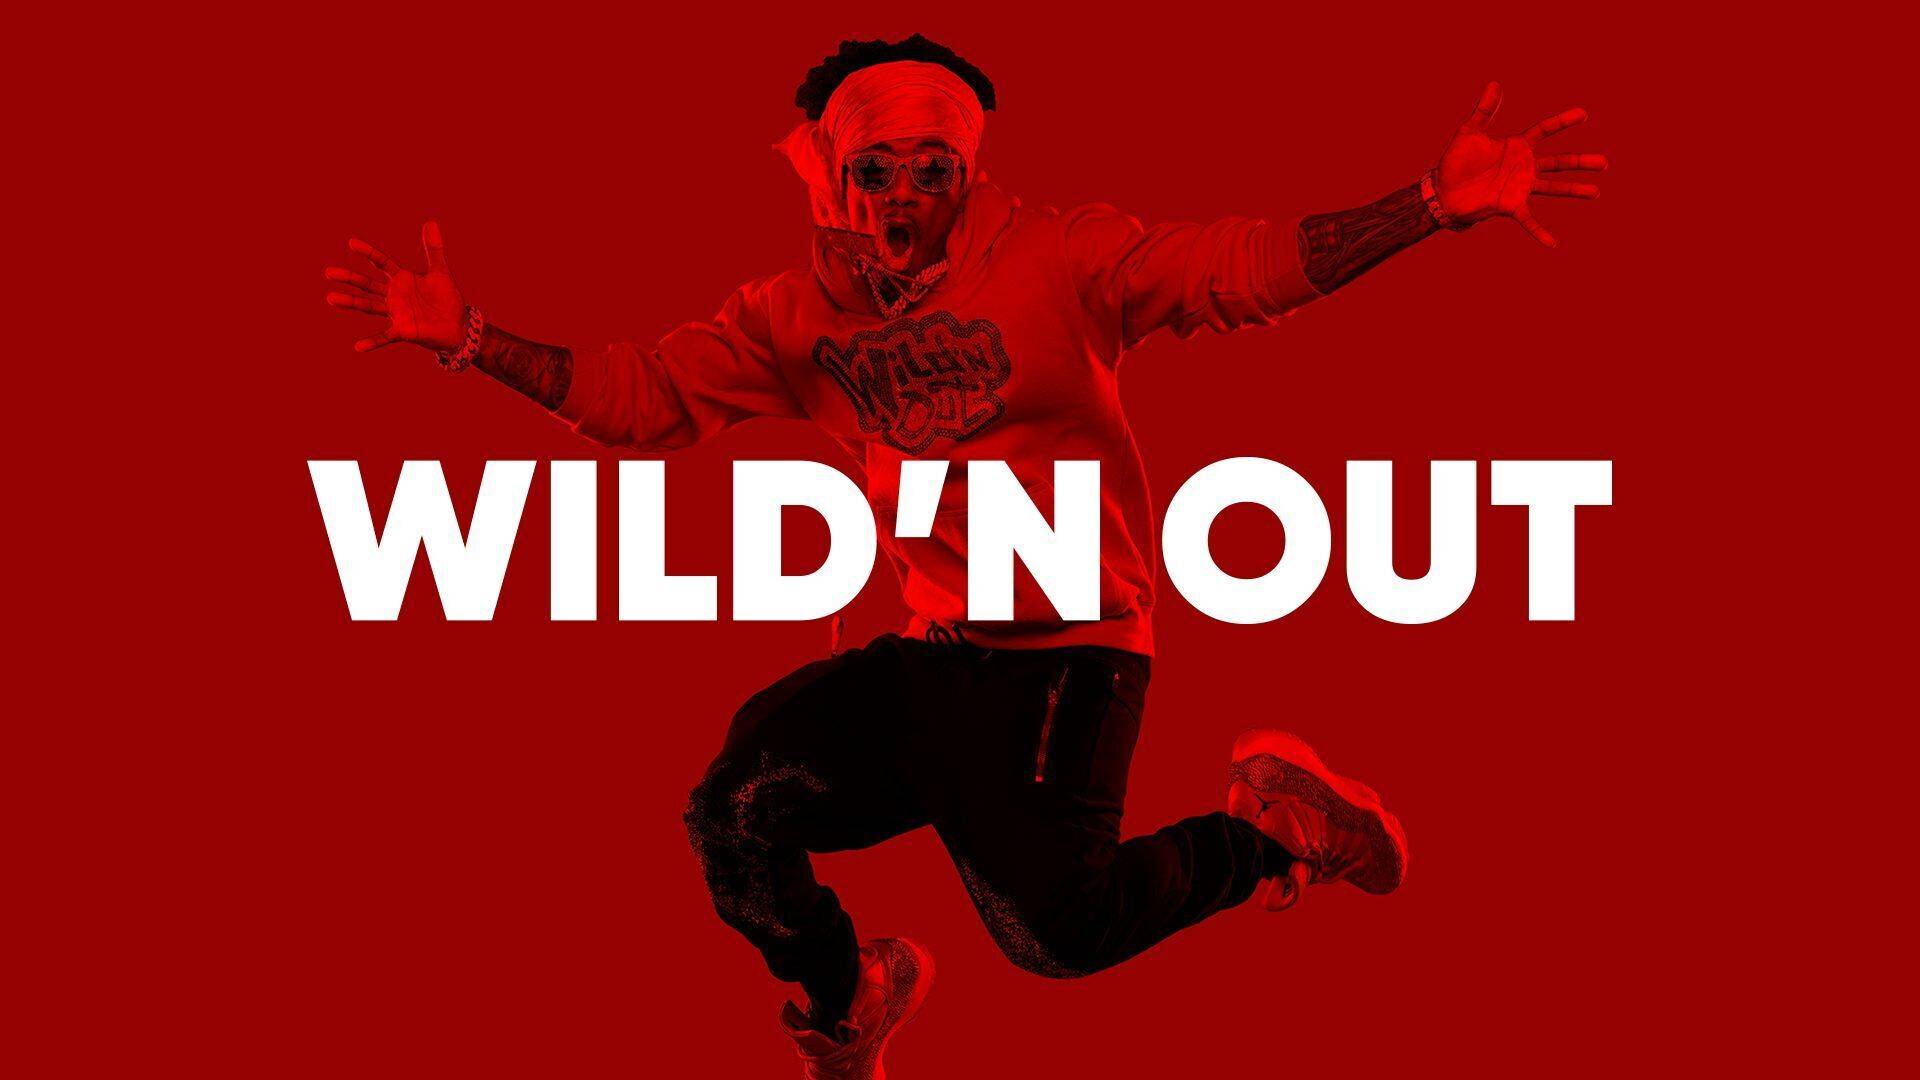 Watch VH1's Wild 'N Out Channel On Pluto TV